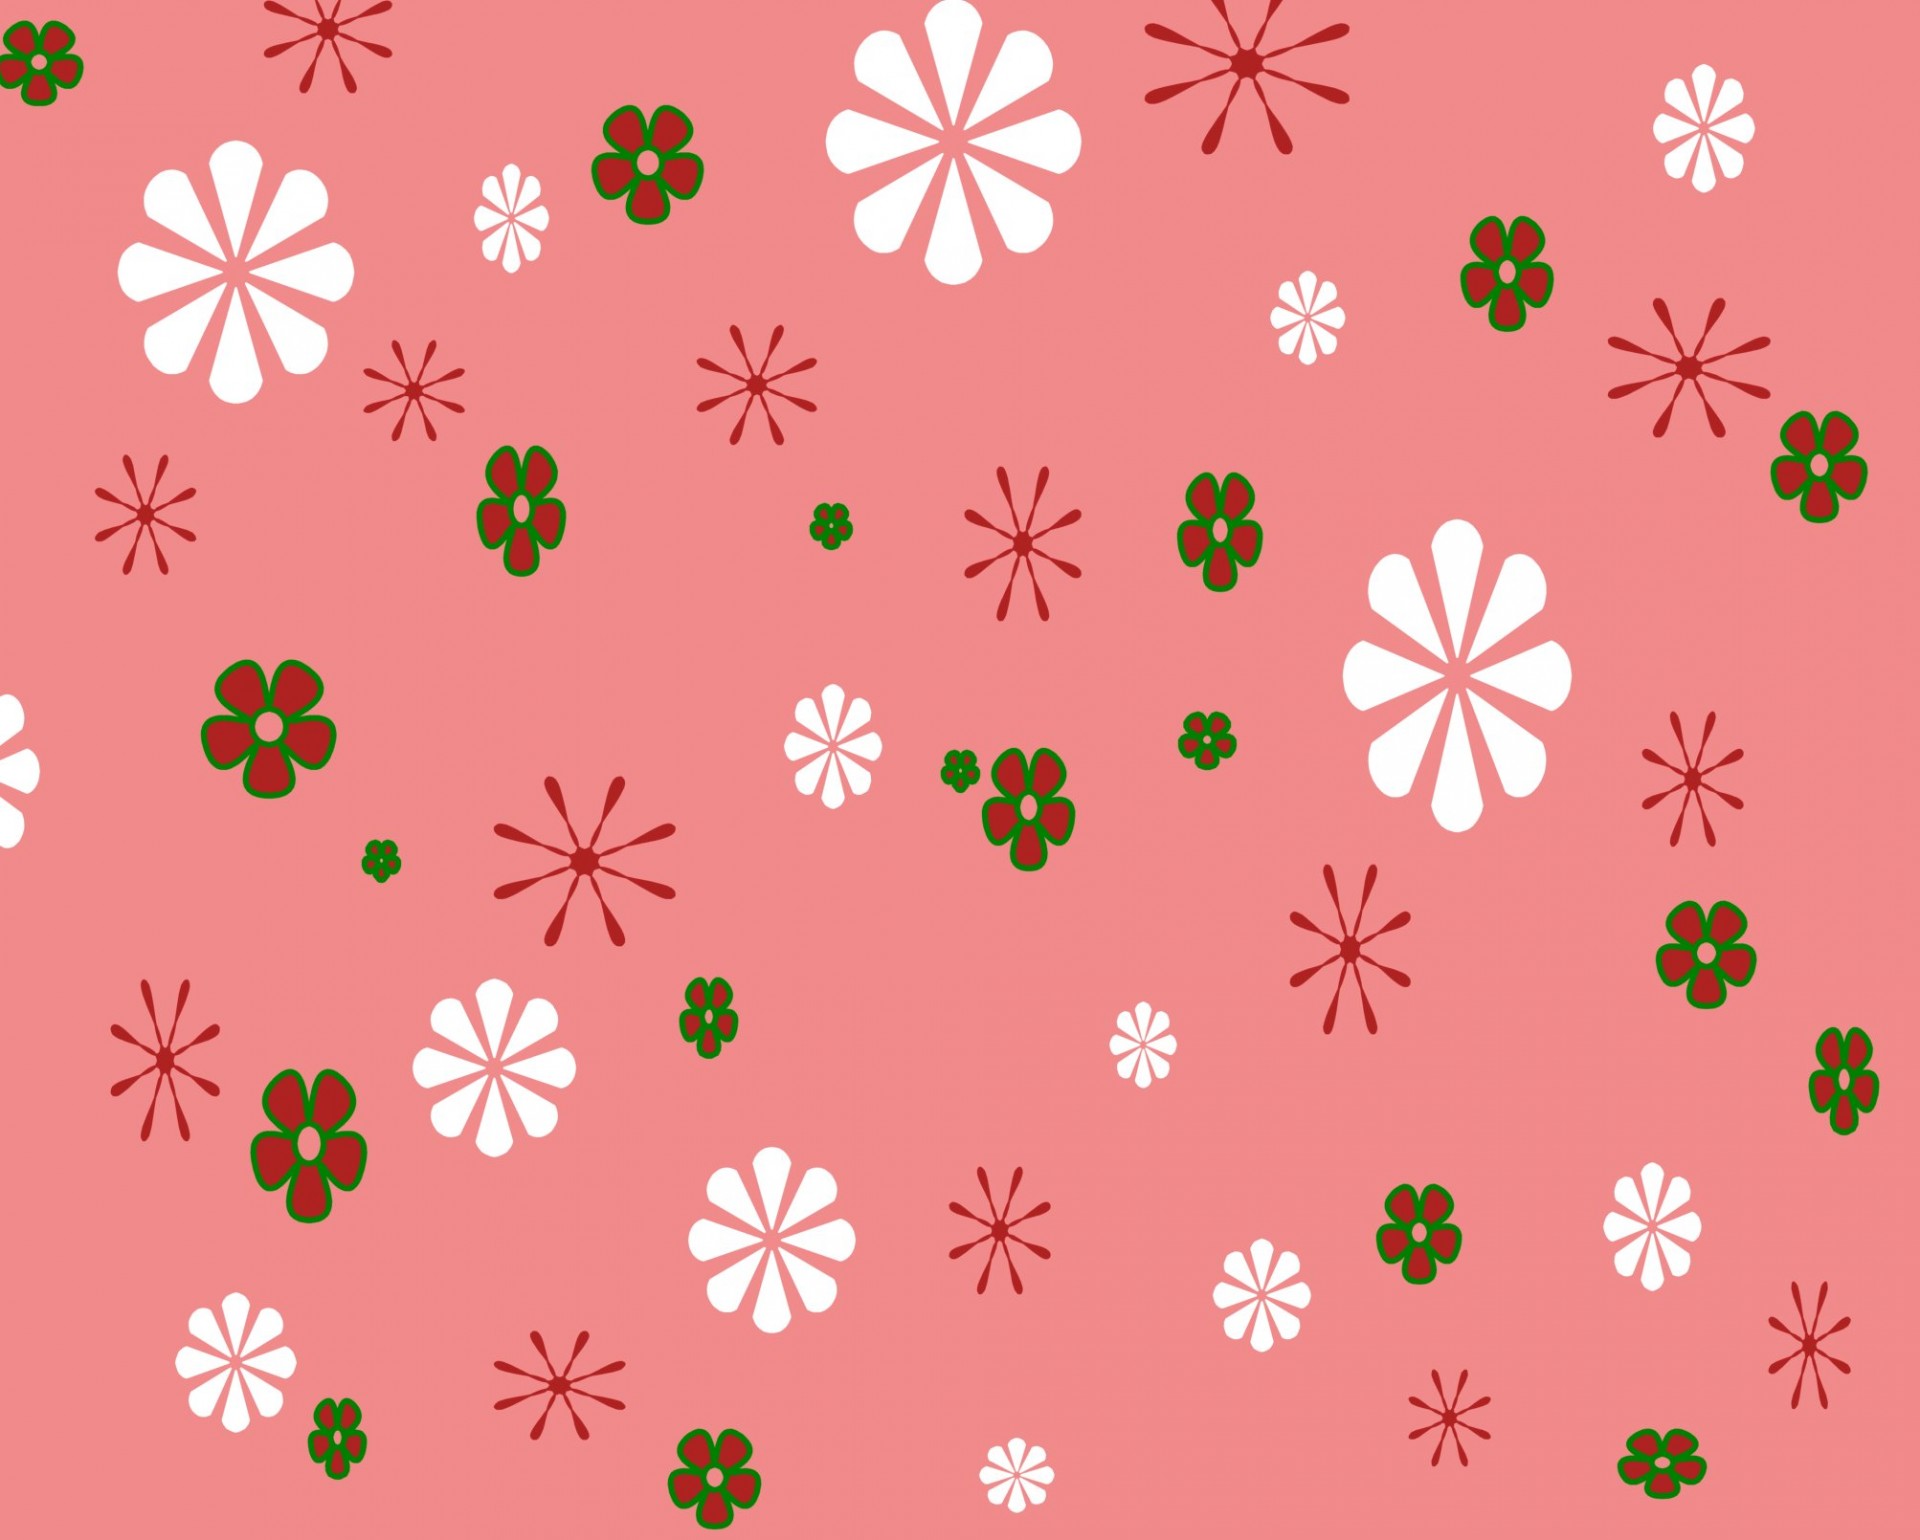 small flowers background free photo